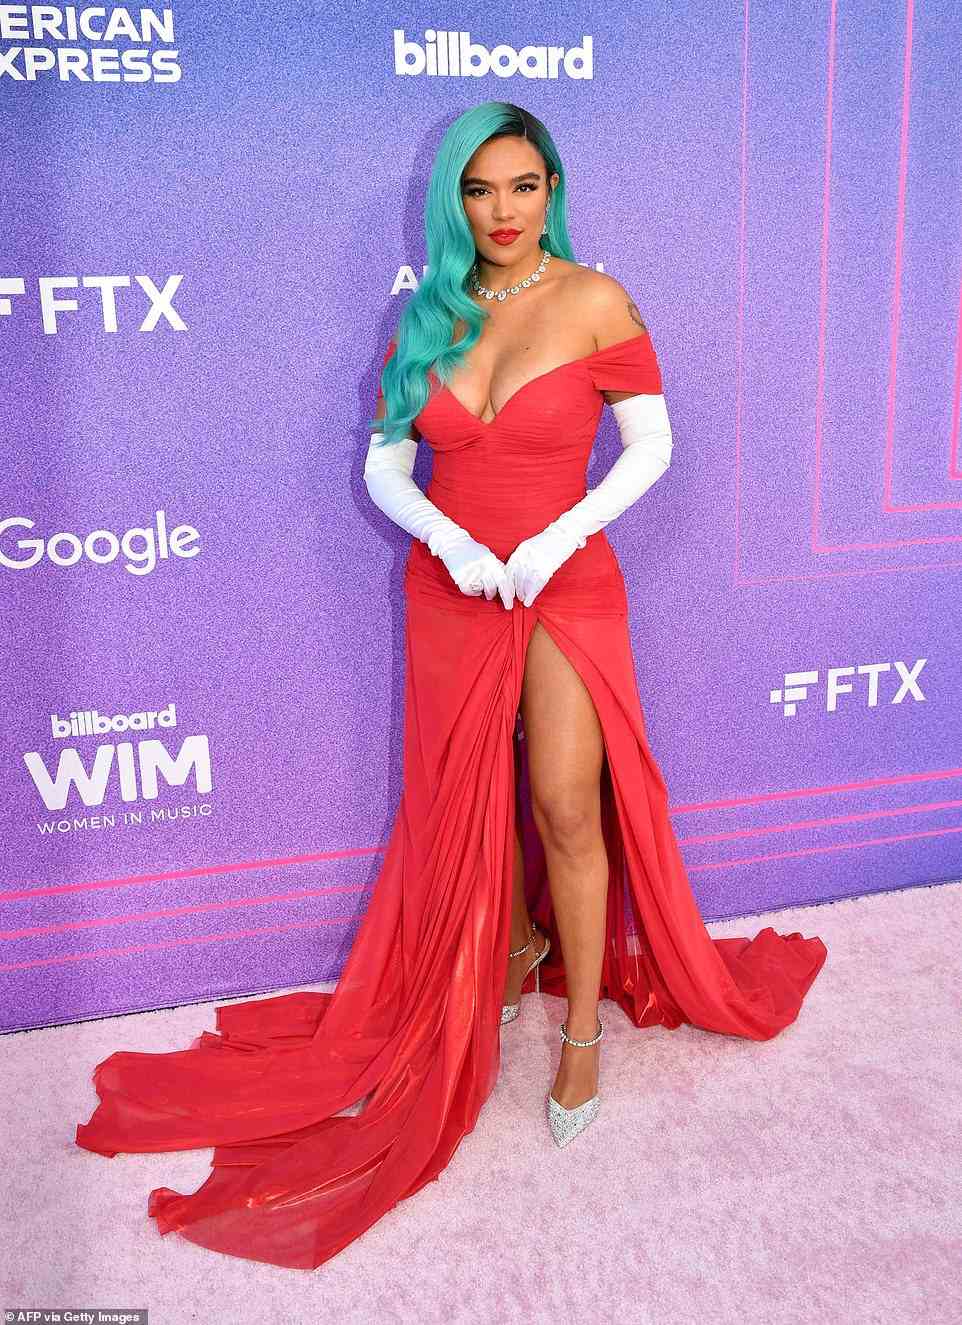 Belle of the ball: Karol G looked like the belle of the ball as she posed in a bright red off-the-shoulder gown with a dramatic slit up one leg